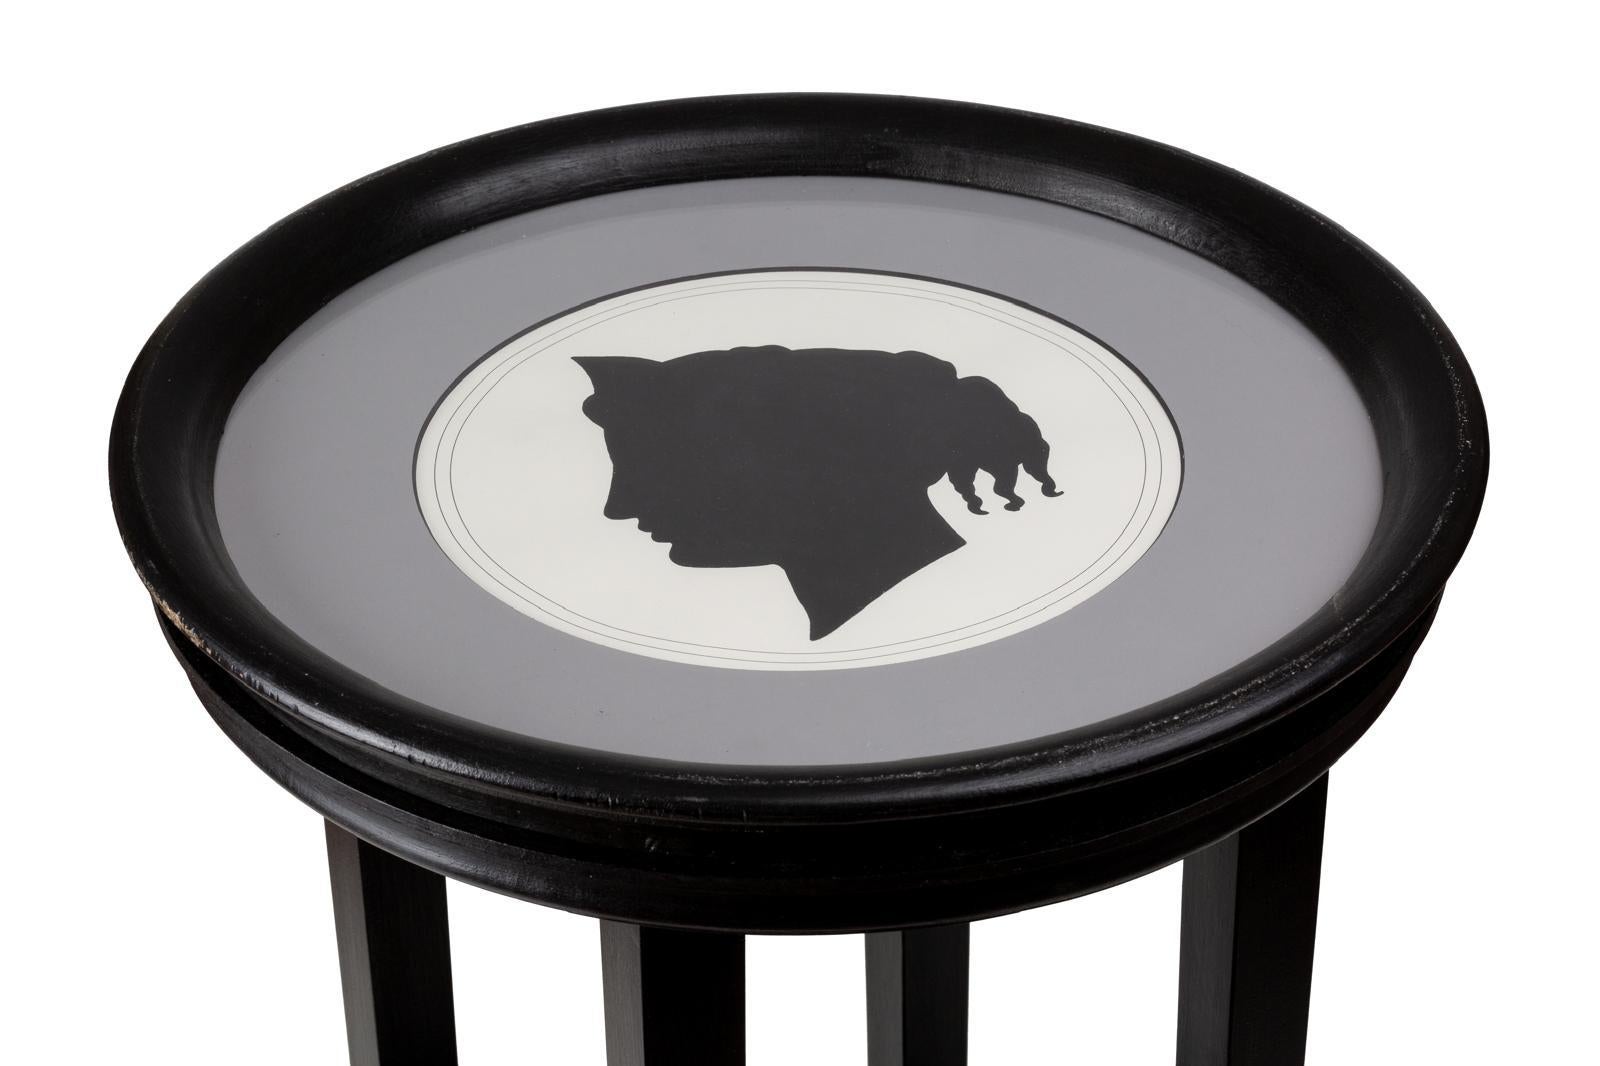 One of two beautiful side table with a neoclasssical woman silhouette black profile print with white background, framed by  a delicate grey passpartout and a round black frame with glass. 
This coffee table fits well in any space and type of